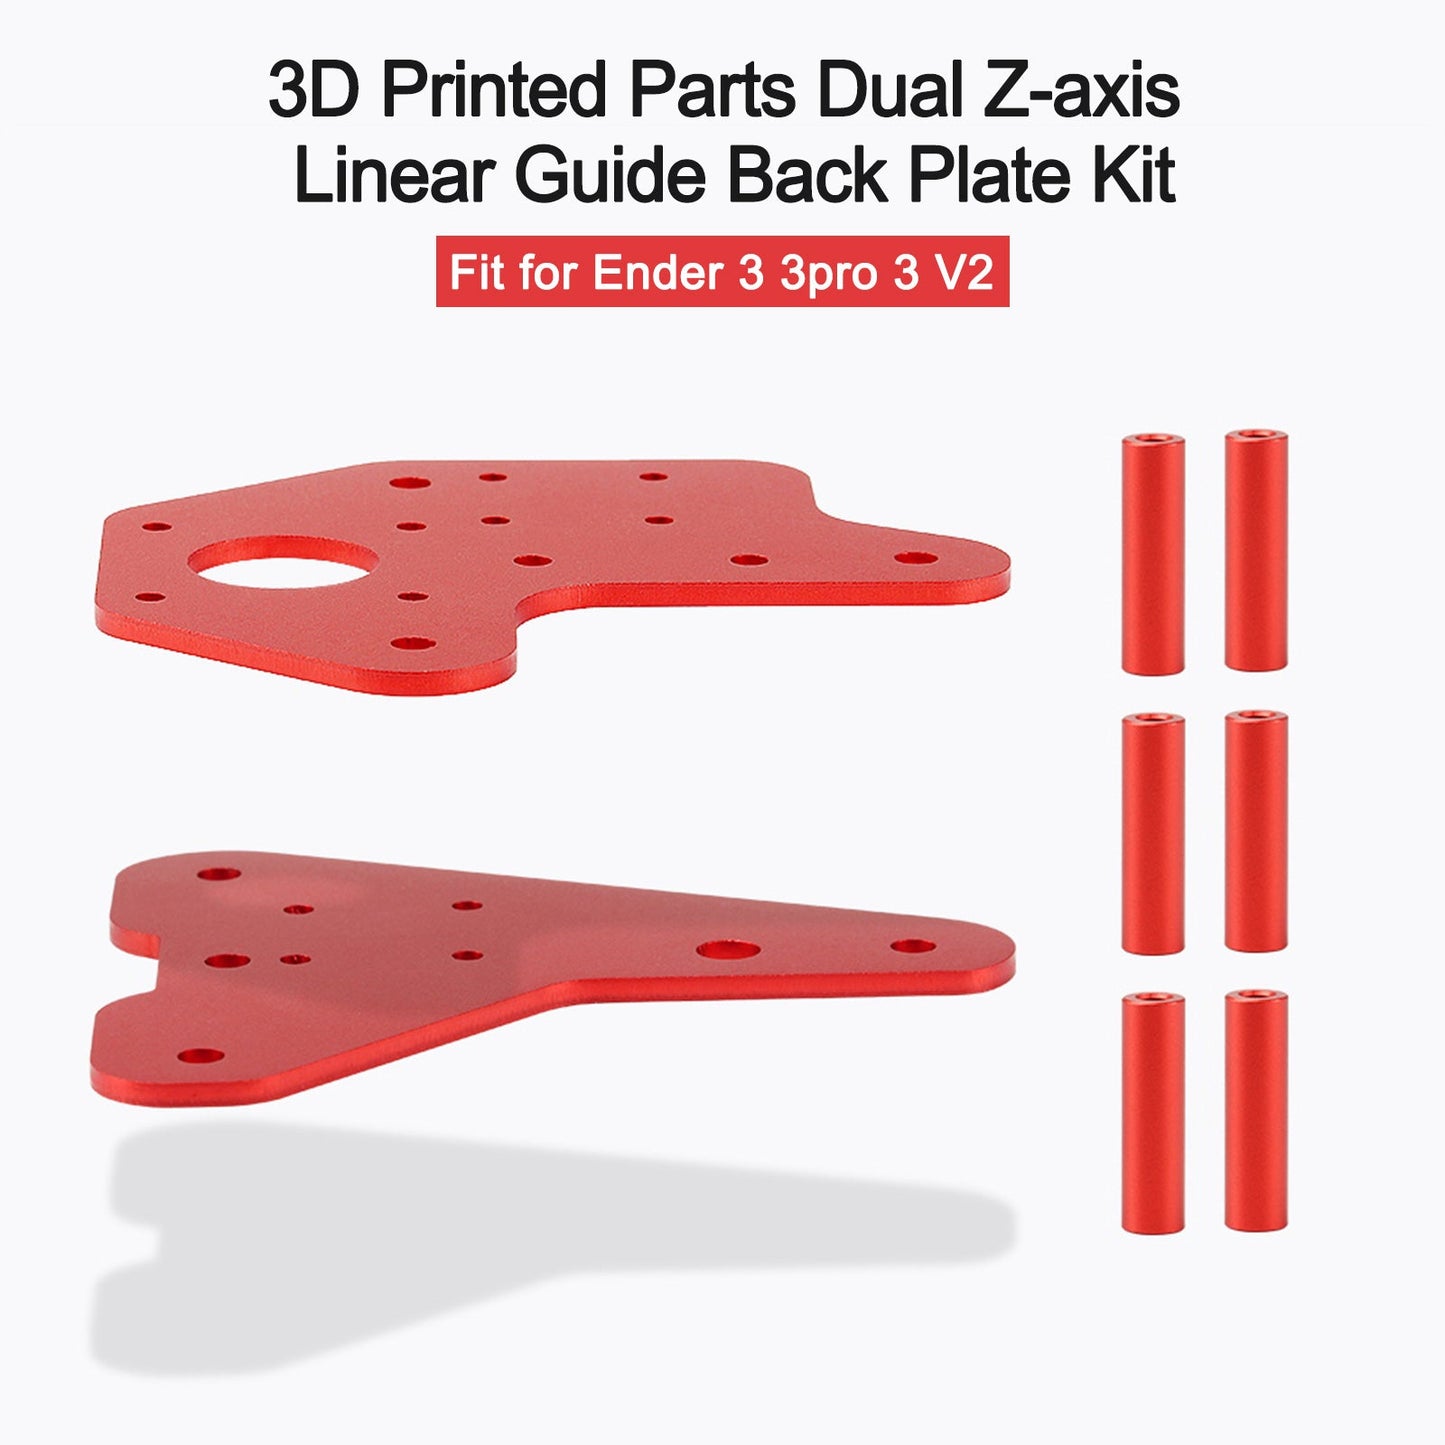 Linear Guide Back Plate Kit for Ender 3 3pro 3 V2 3D Printed Parts Dual Z-axis